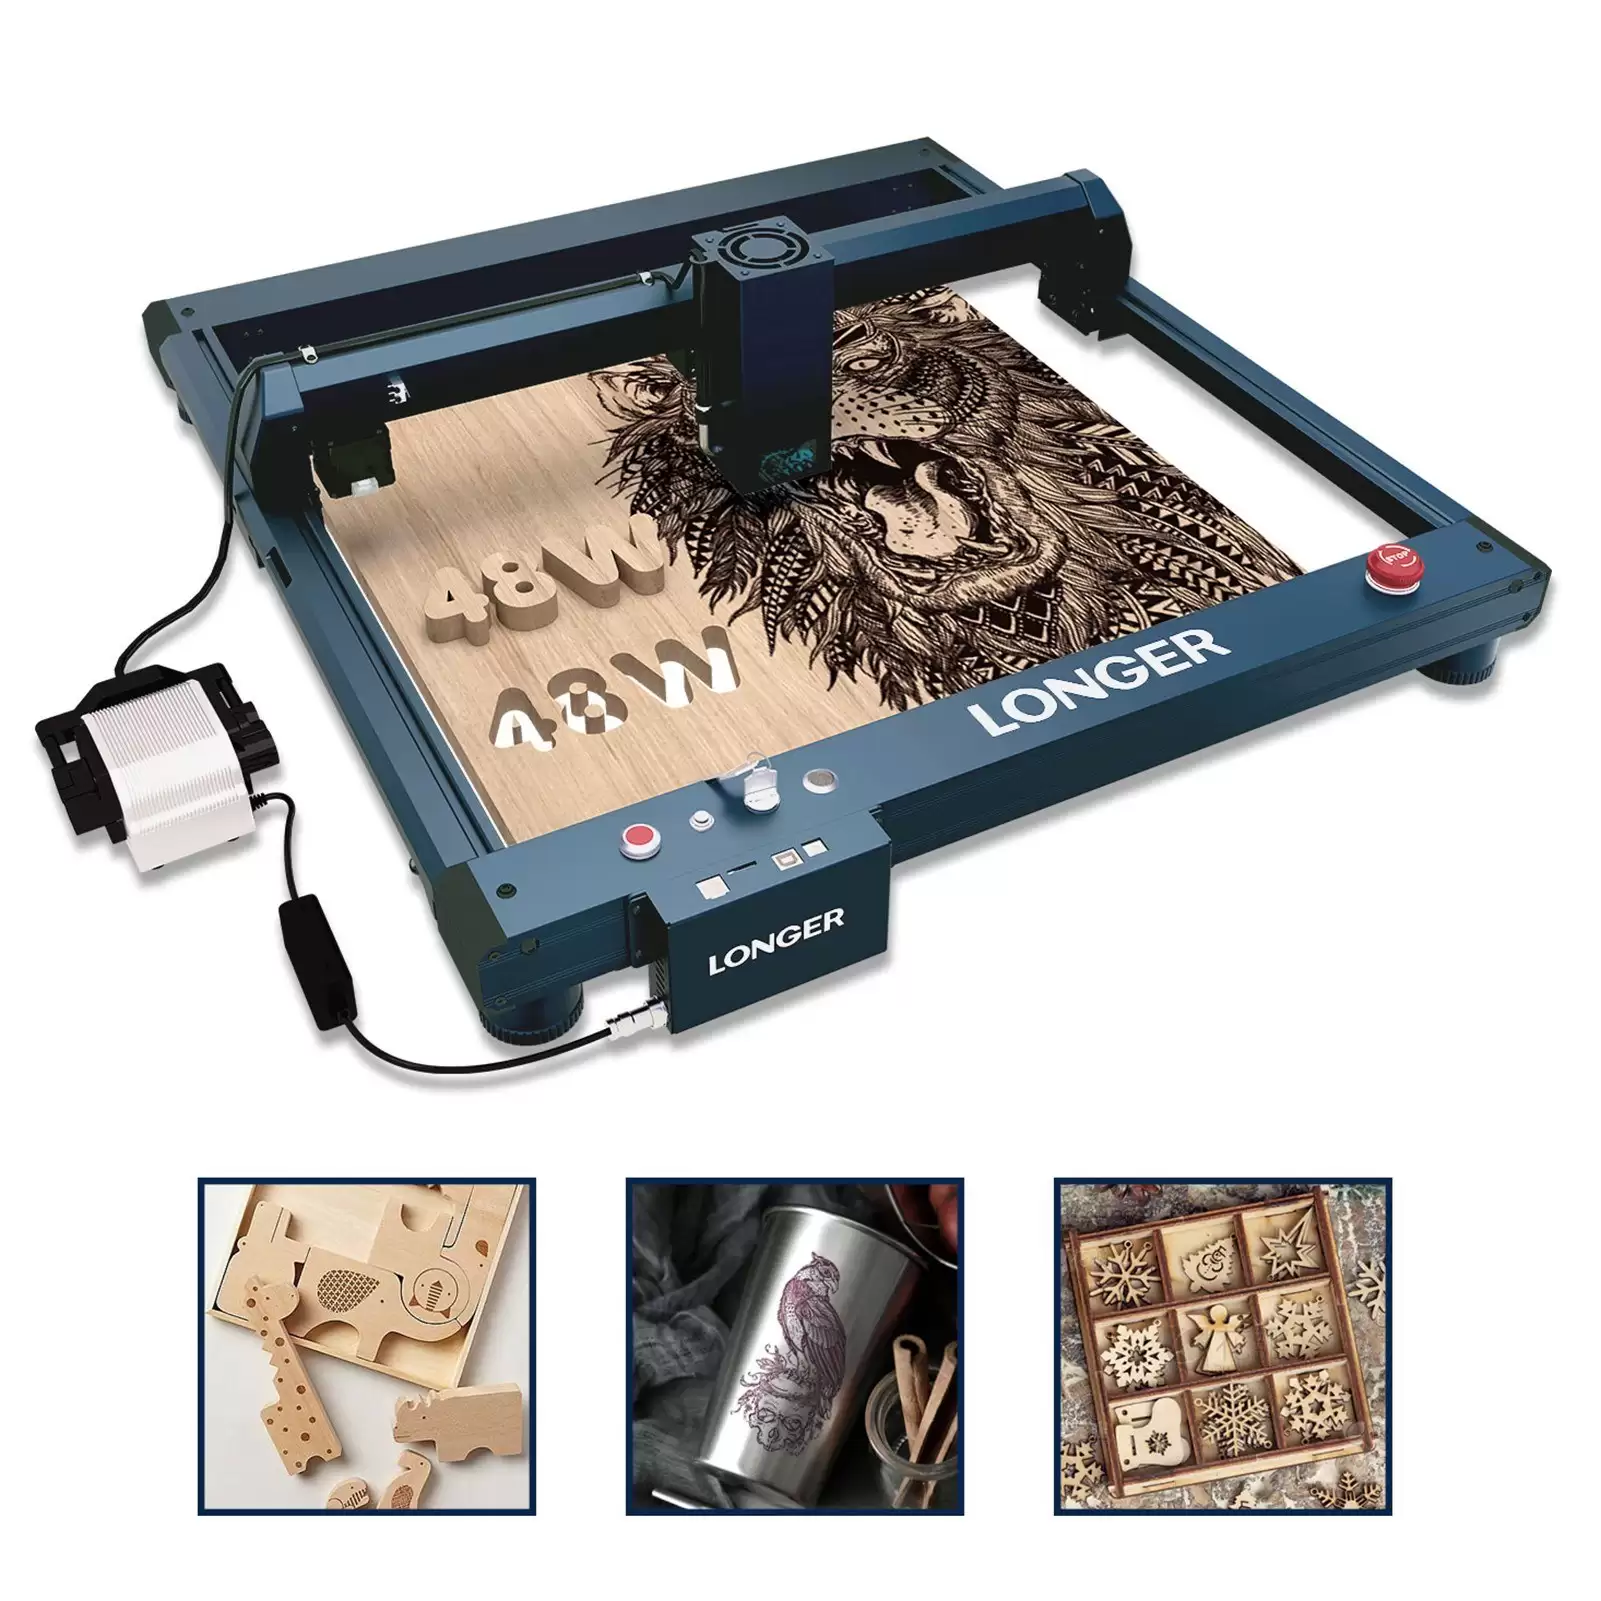 Pay Only $845 For Laser B1 40w Laser Engraver With Smart Air Assist System With This Discount Coupon At Cafago